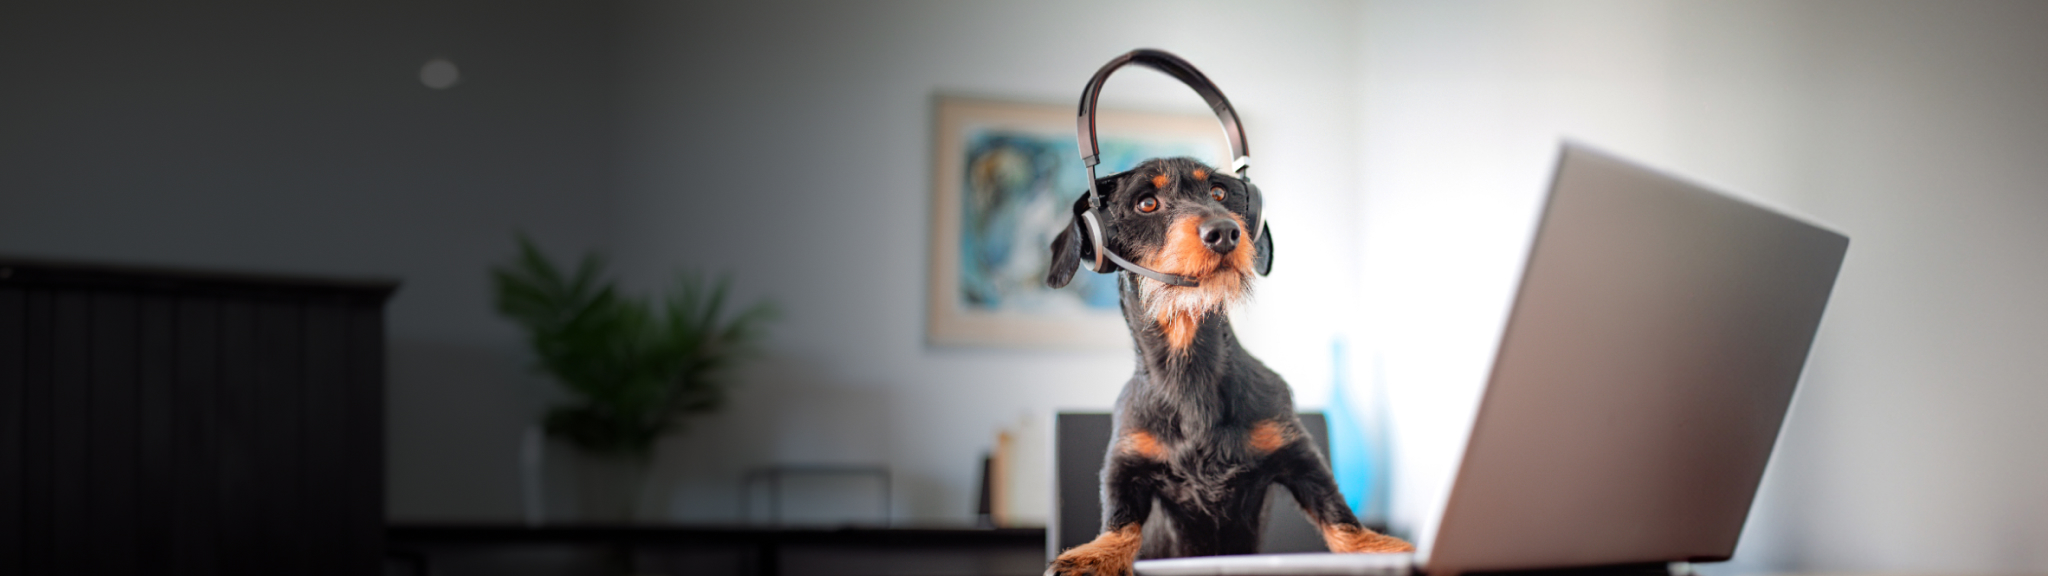 Dog and headphones on video-call